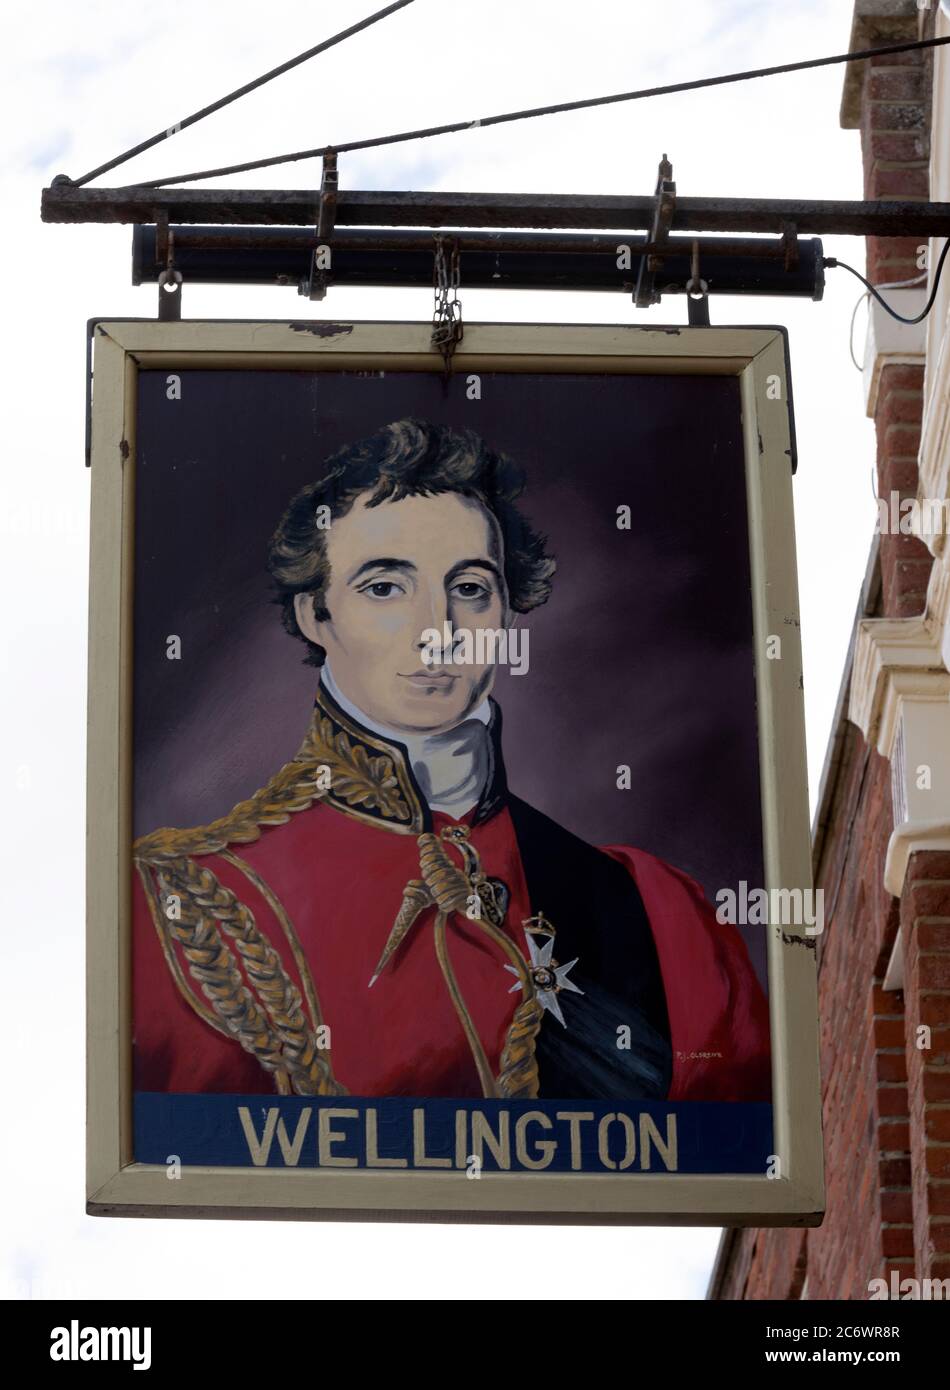 Traditional hanging pub sign at The Wellington public house,  High Street, Old Portsmouth, Portsmouth, Hampshire, England, UK Stock Photo